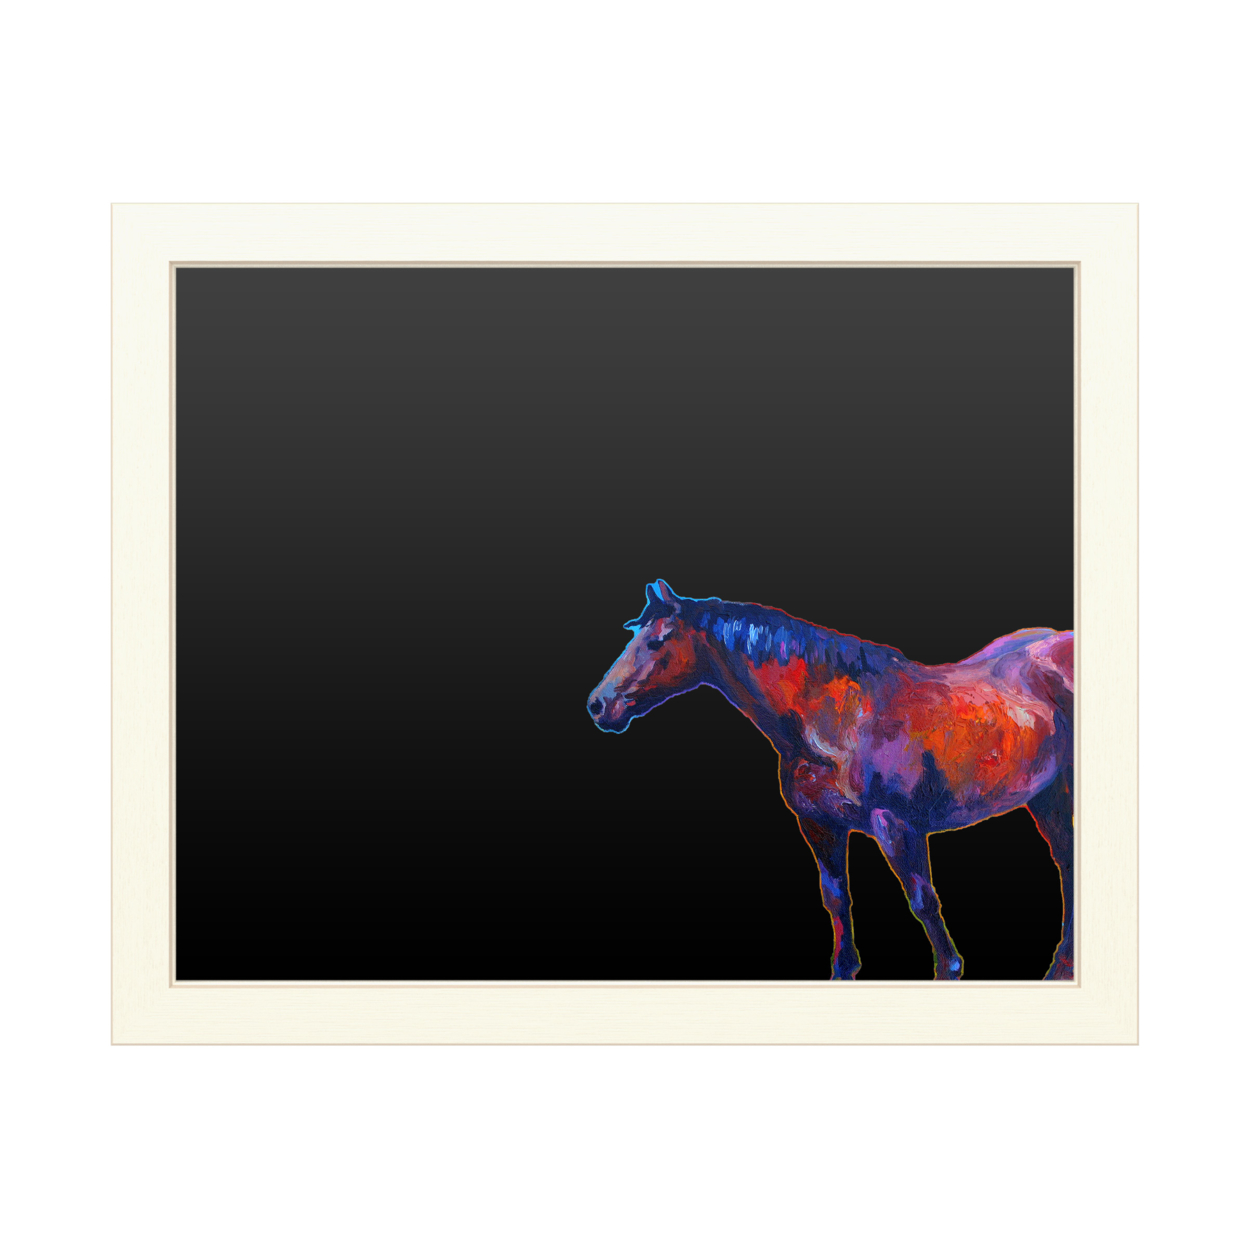 16 X 20 Chalk Board With Printed Artwork - Marion Rose Bay Mare I White Board - Ready To Hang Chalkboard